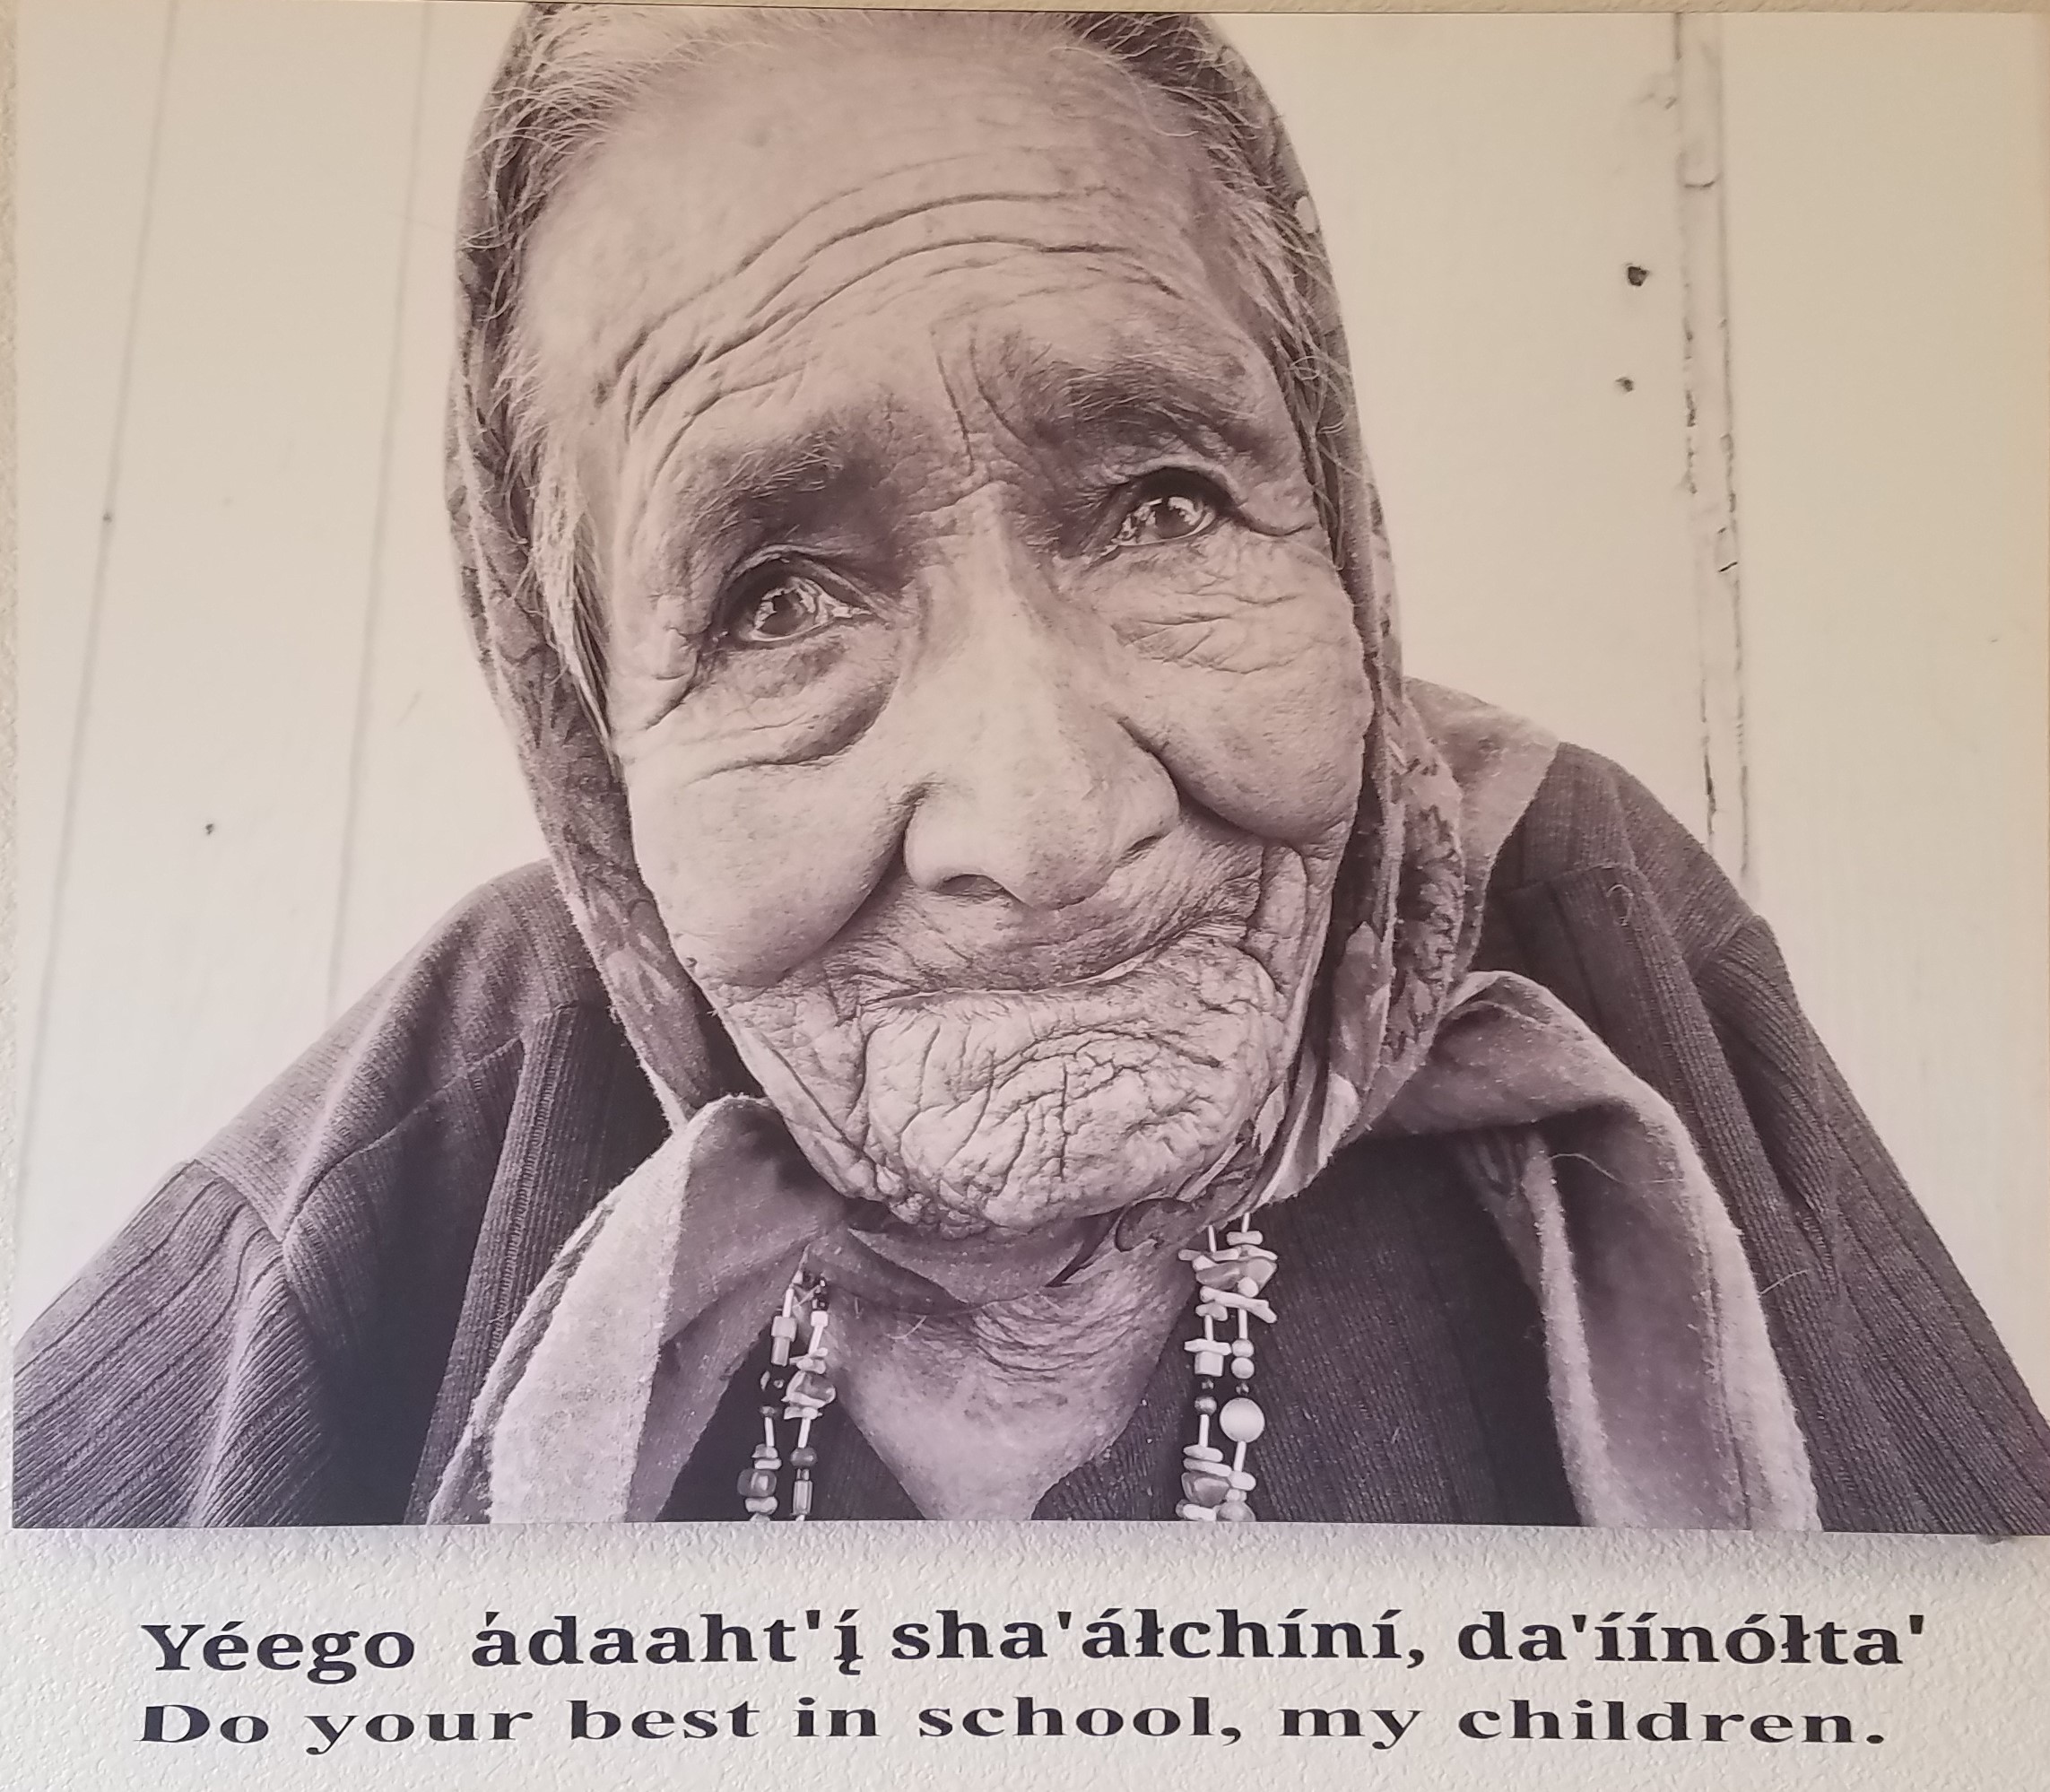 Older Woman Poster With Words of Encouragement